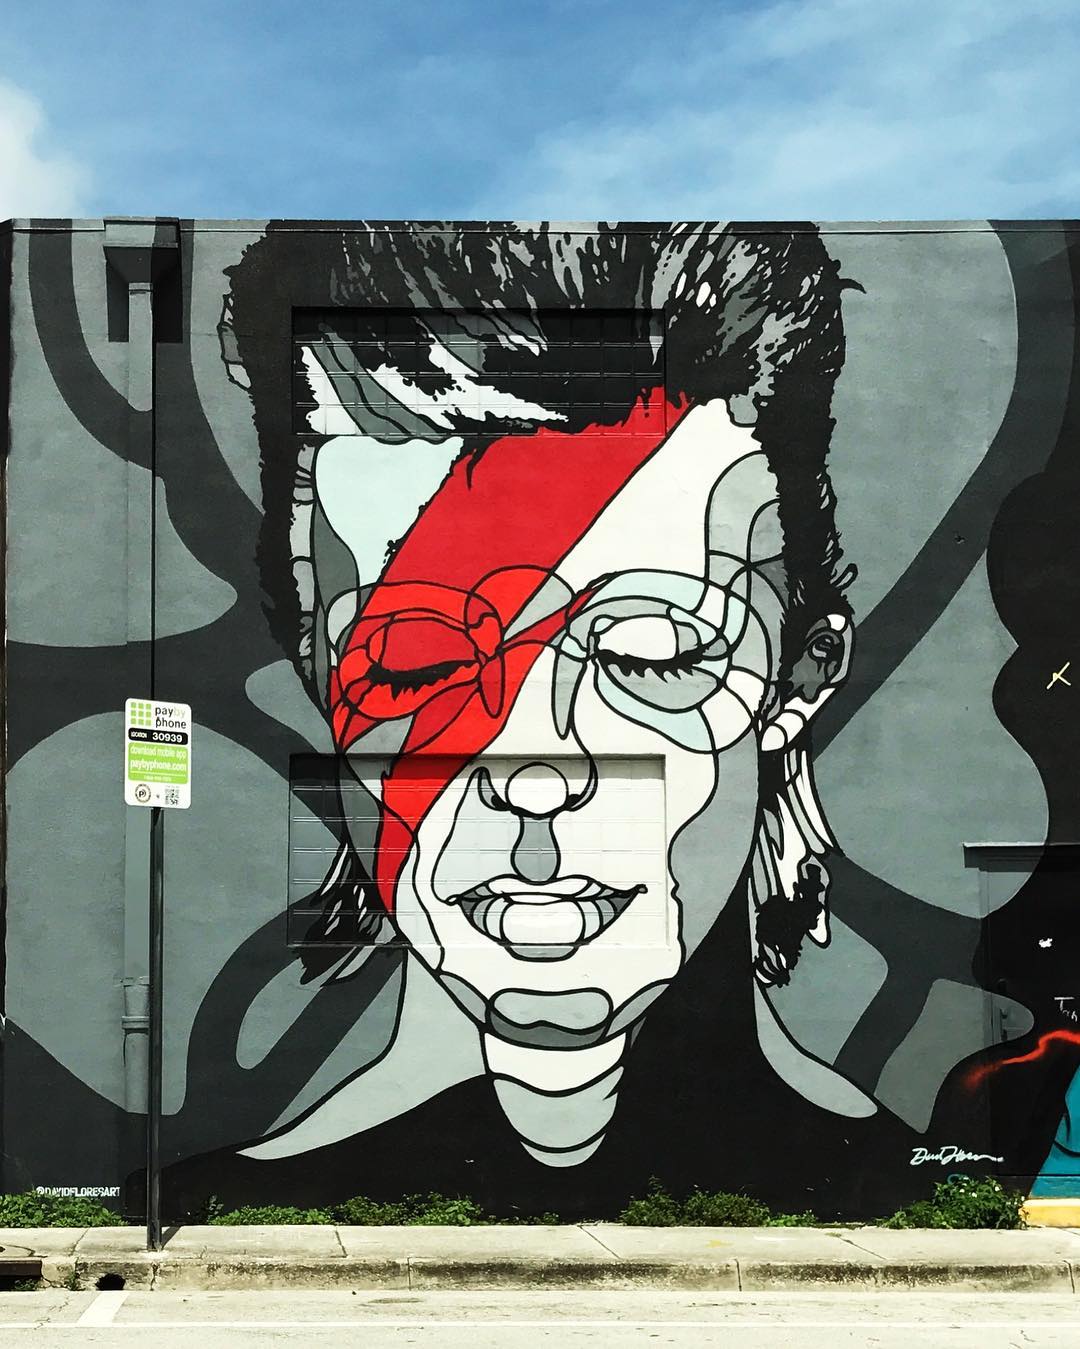 mural in Miami by artist David Flores. Tagged: David Bowie, music